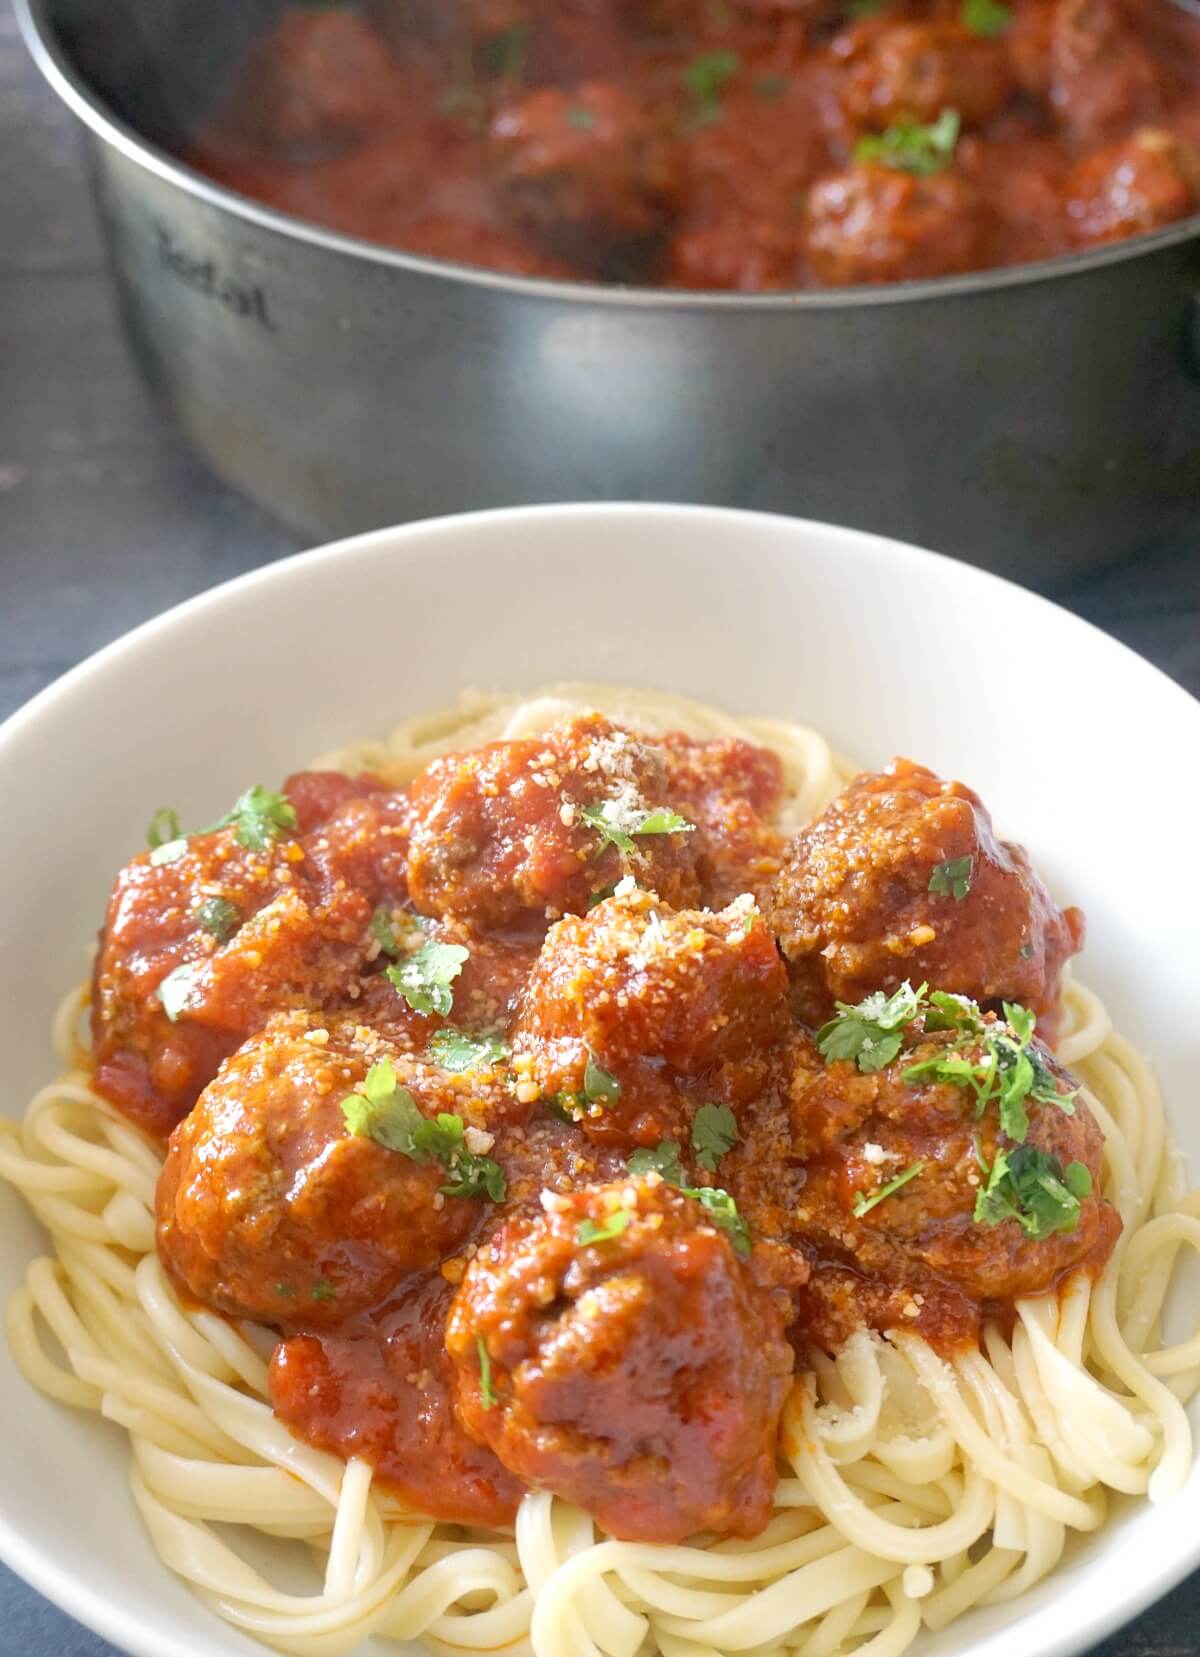 A while bowl with spaghetti topped with meatballs in tomato sauce.